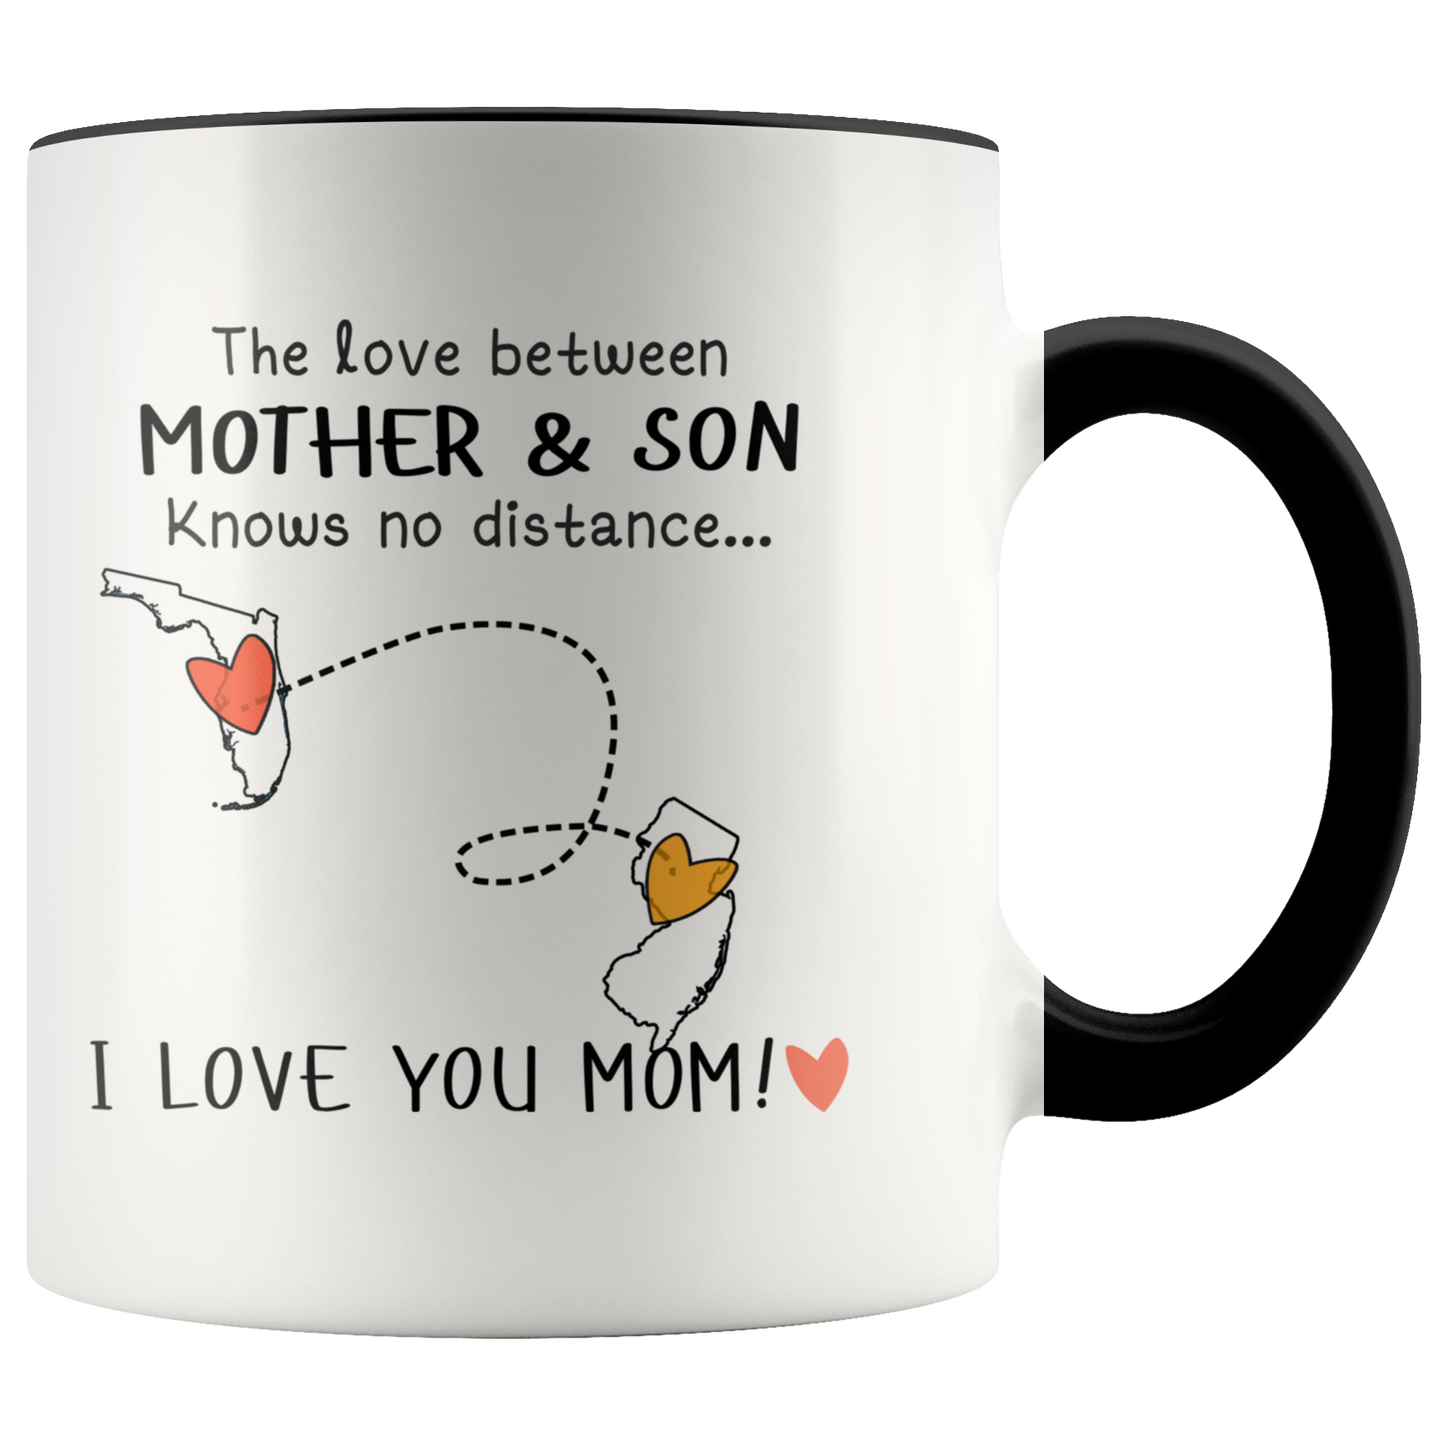 MUG01221340623-sp-23015 - The Love Between Mother And Son Knows No Distance, I Love Yo